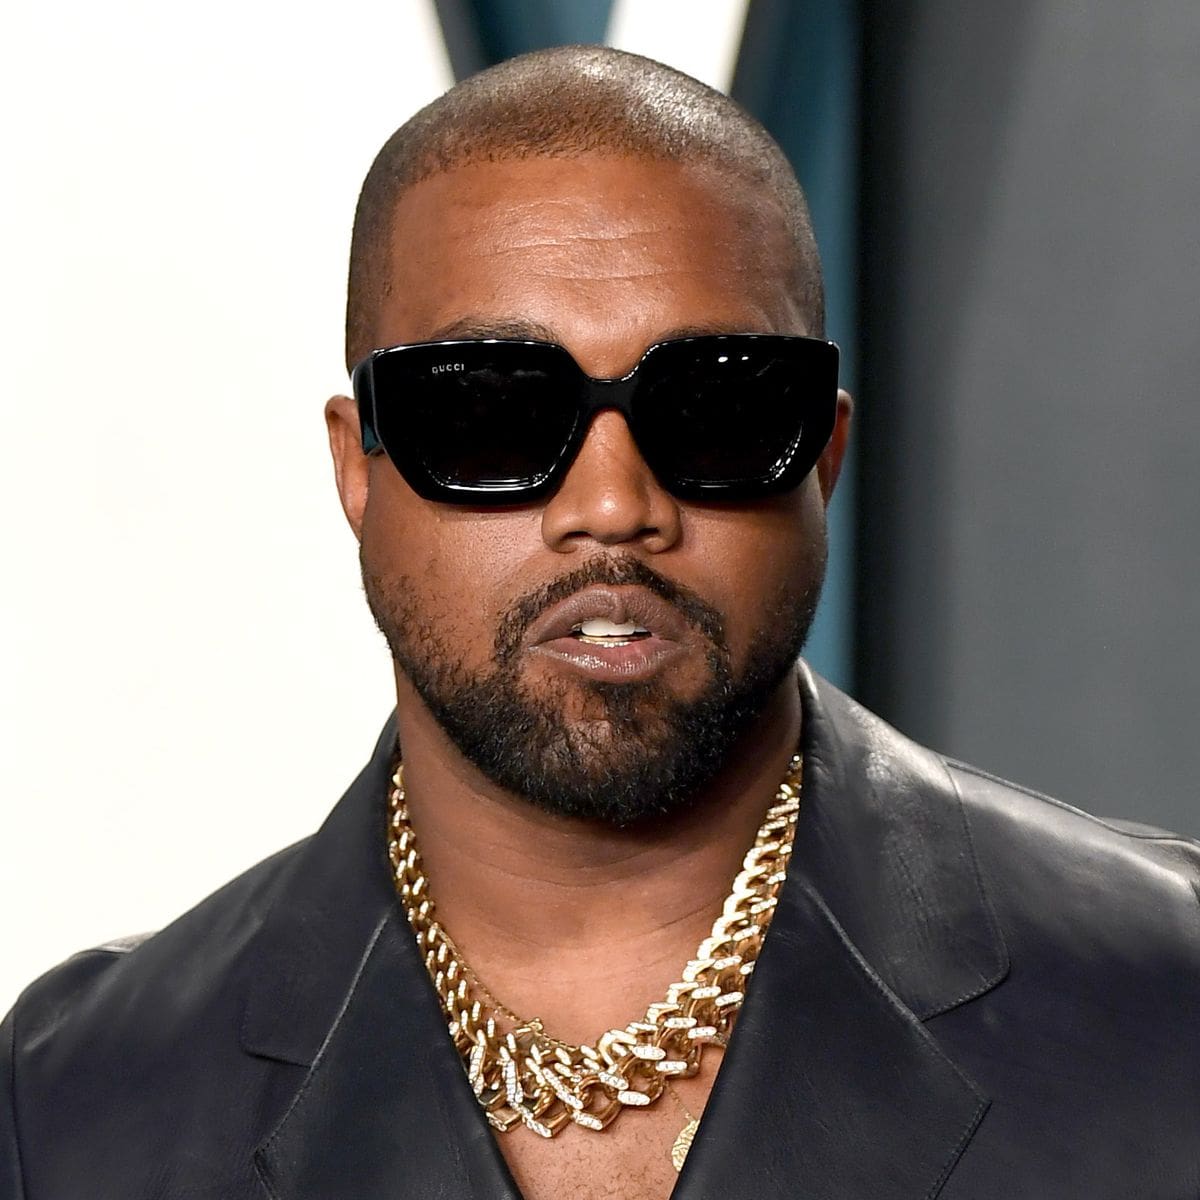 ”kanye-west-buys-a-malibu-home-check-out-how-much-it-costs”